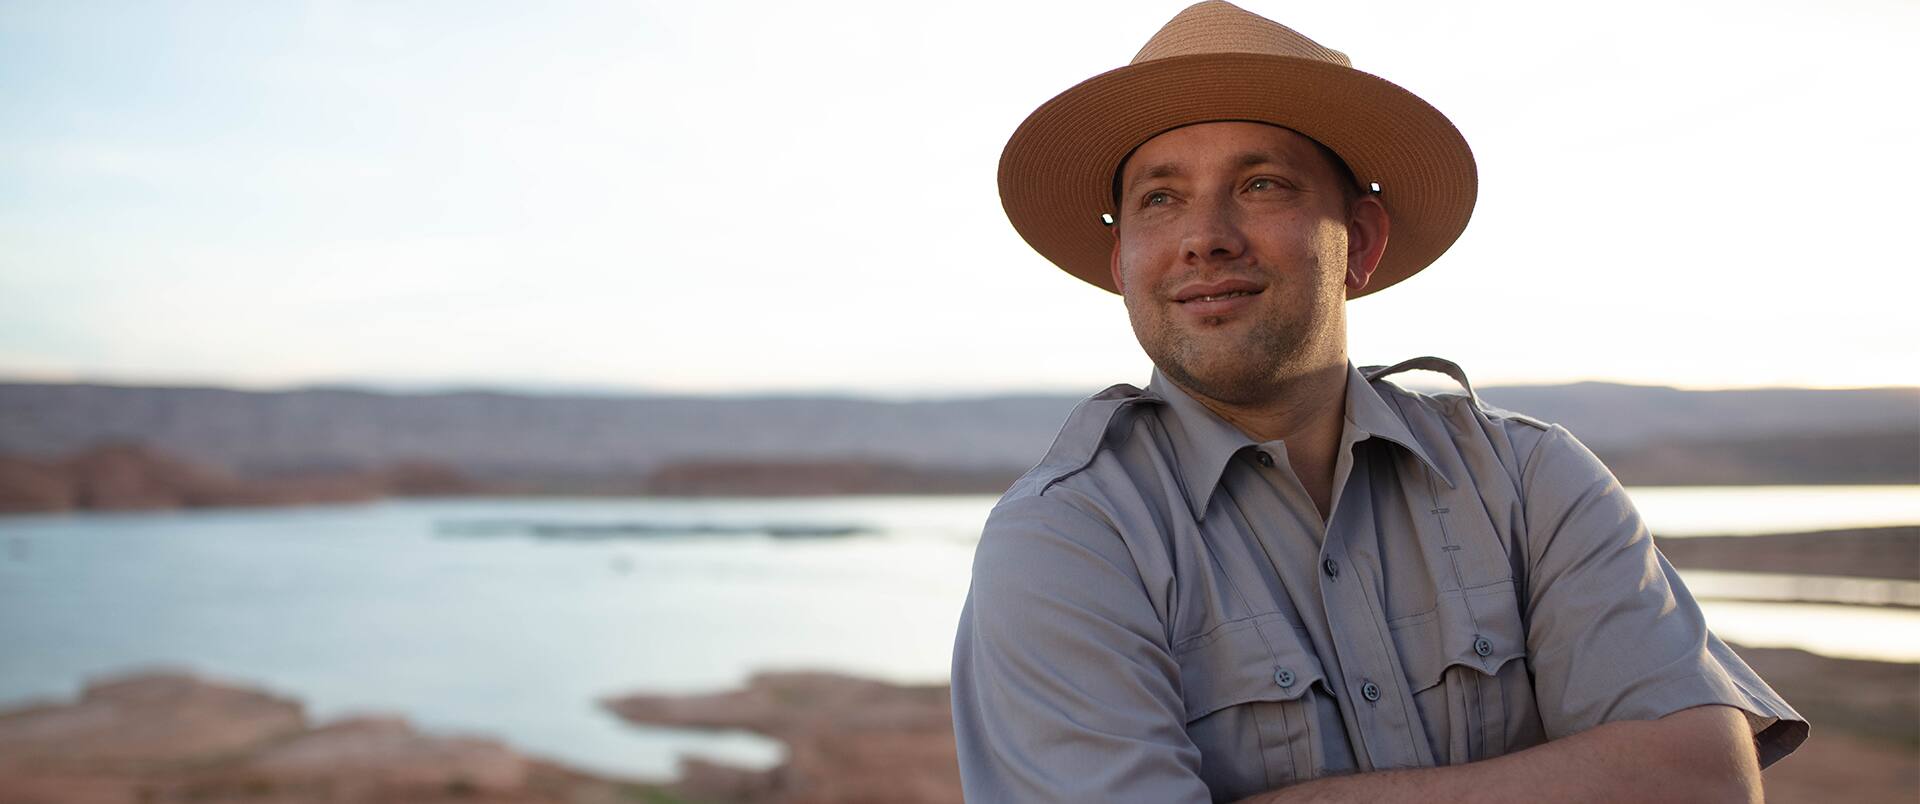 John Roos, who earned his degree in 2018, wearing a park ranger hat and grey buttondown shirt standing with his arms folded. 